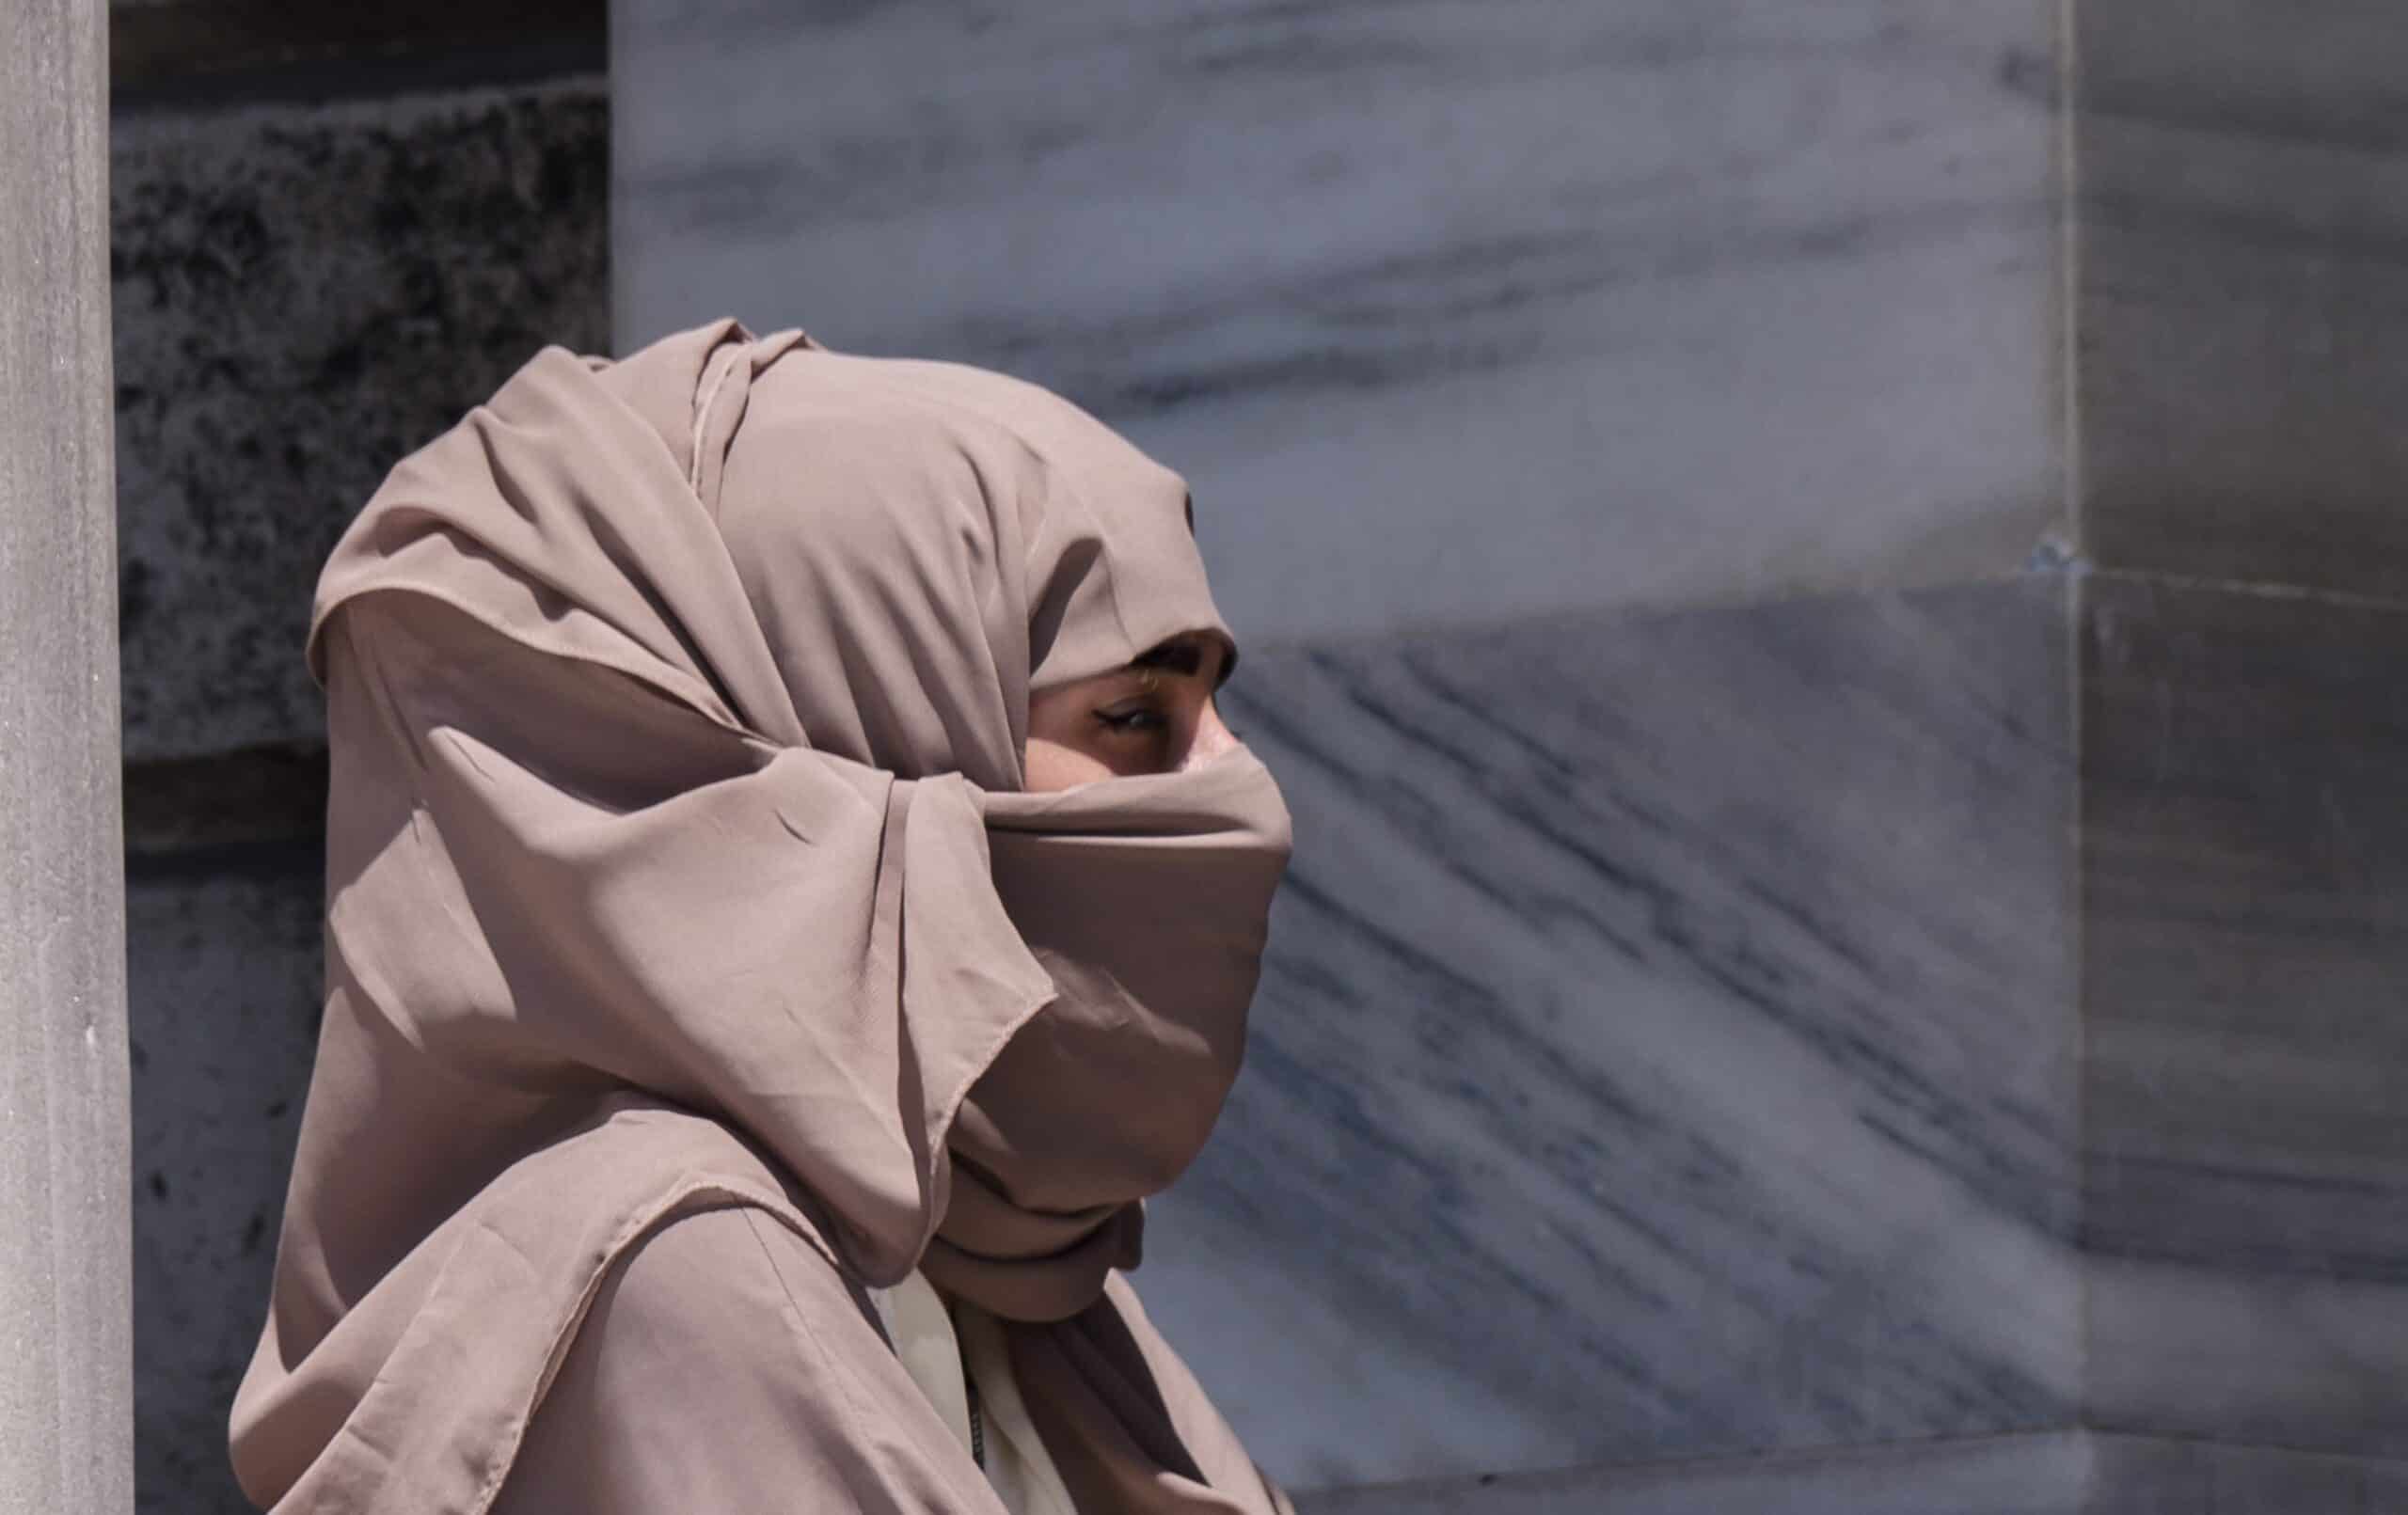 Breaking down Quebec's niqab ban and the continuing 